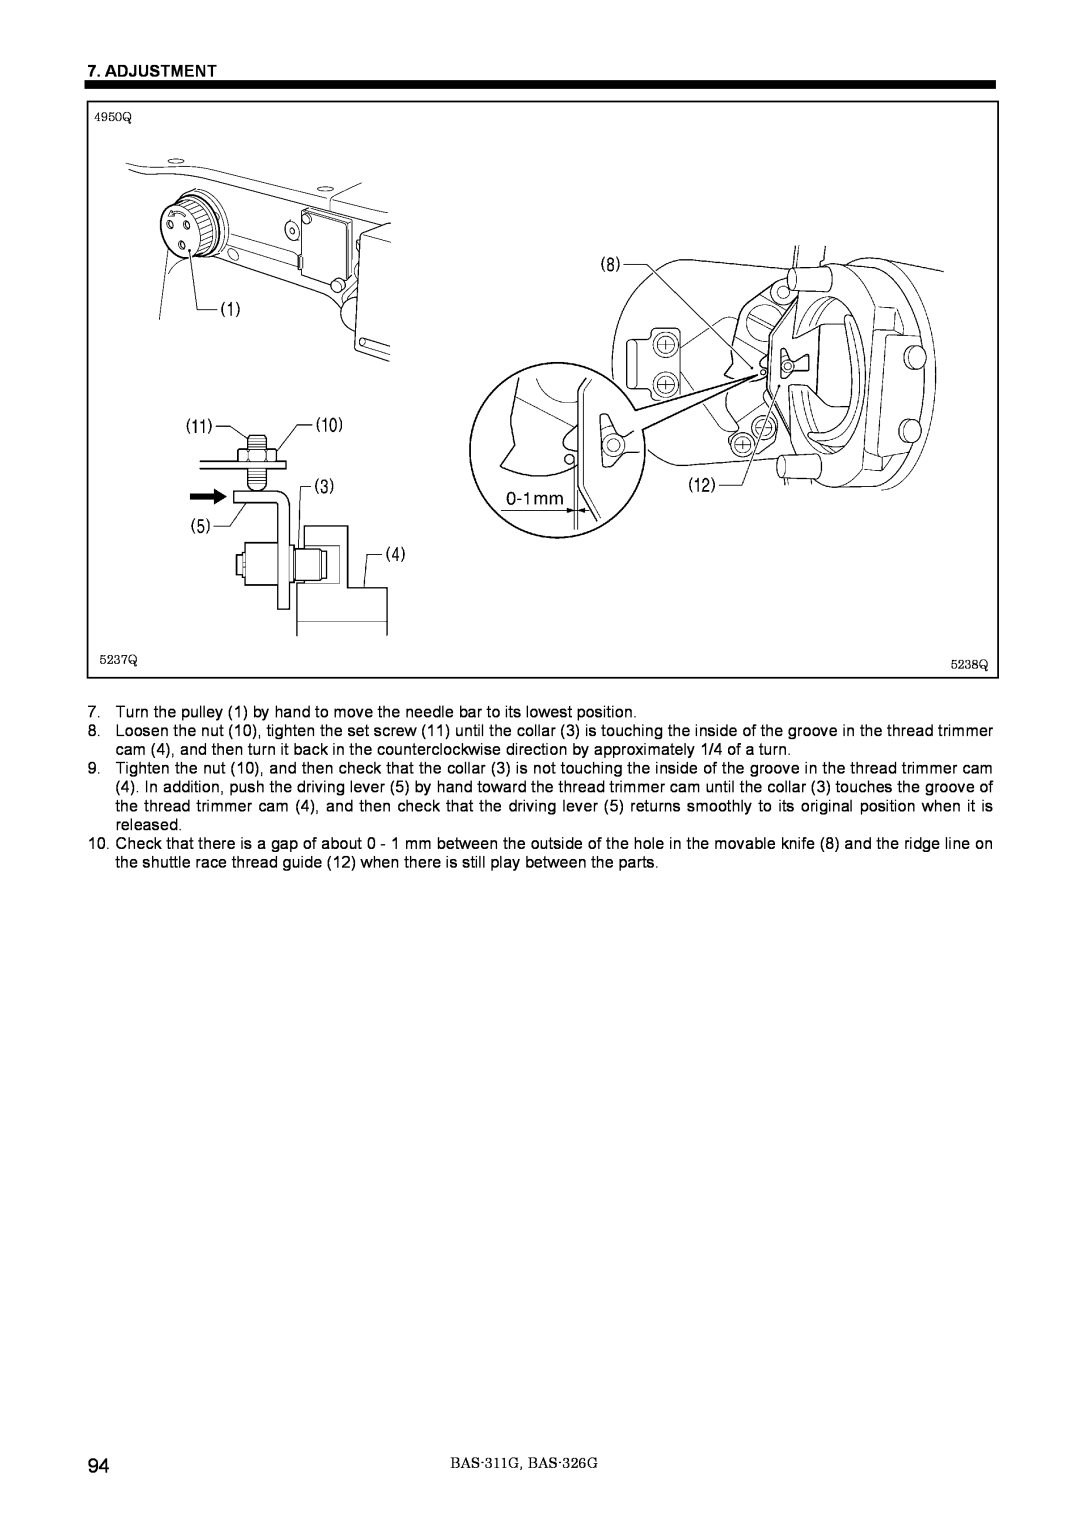 Brother BAS-311G service manual Adjustment, Turn the pulley 1 by hand to move the needle bar to its lowest position 